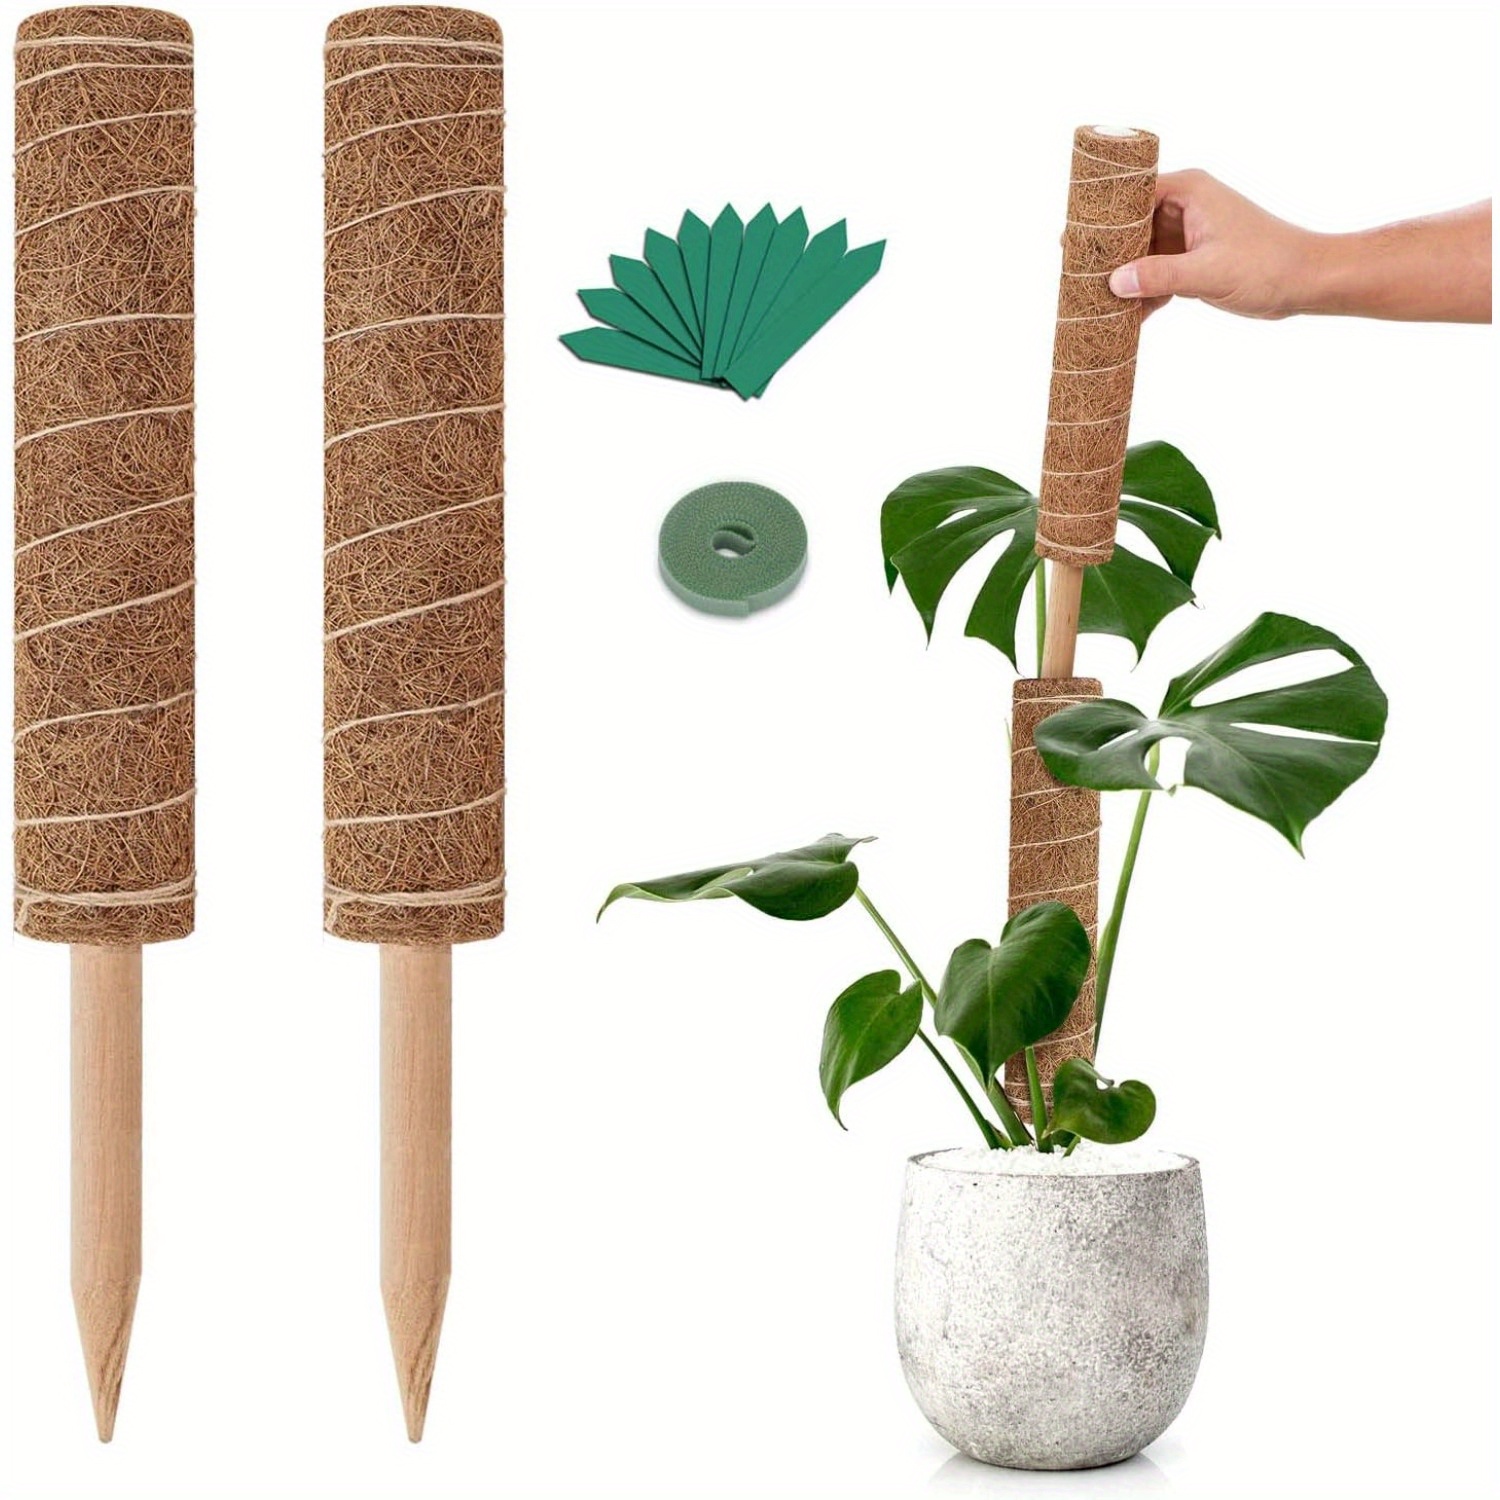 

24 Inch Moss Pole, 2 Pcs 15 Inch Stackable Totem Pole Plant Support, Moss Sticks For Indoor Plants With 15pcs Labels And 78in Garden Ties, Stake For Climbing Plants Snake Plant